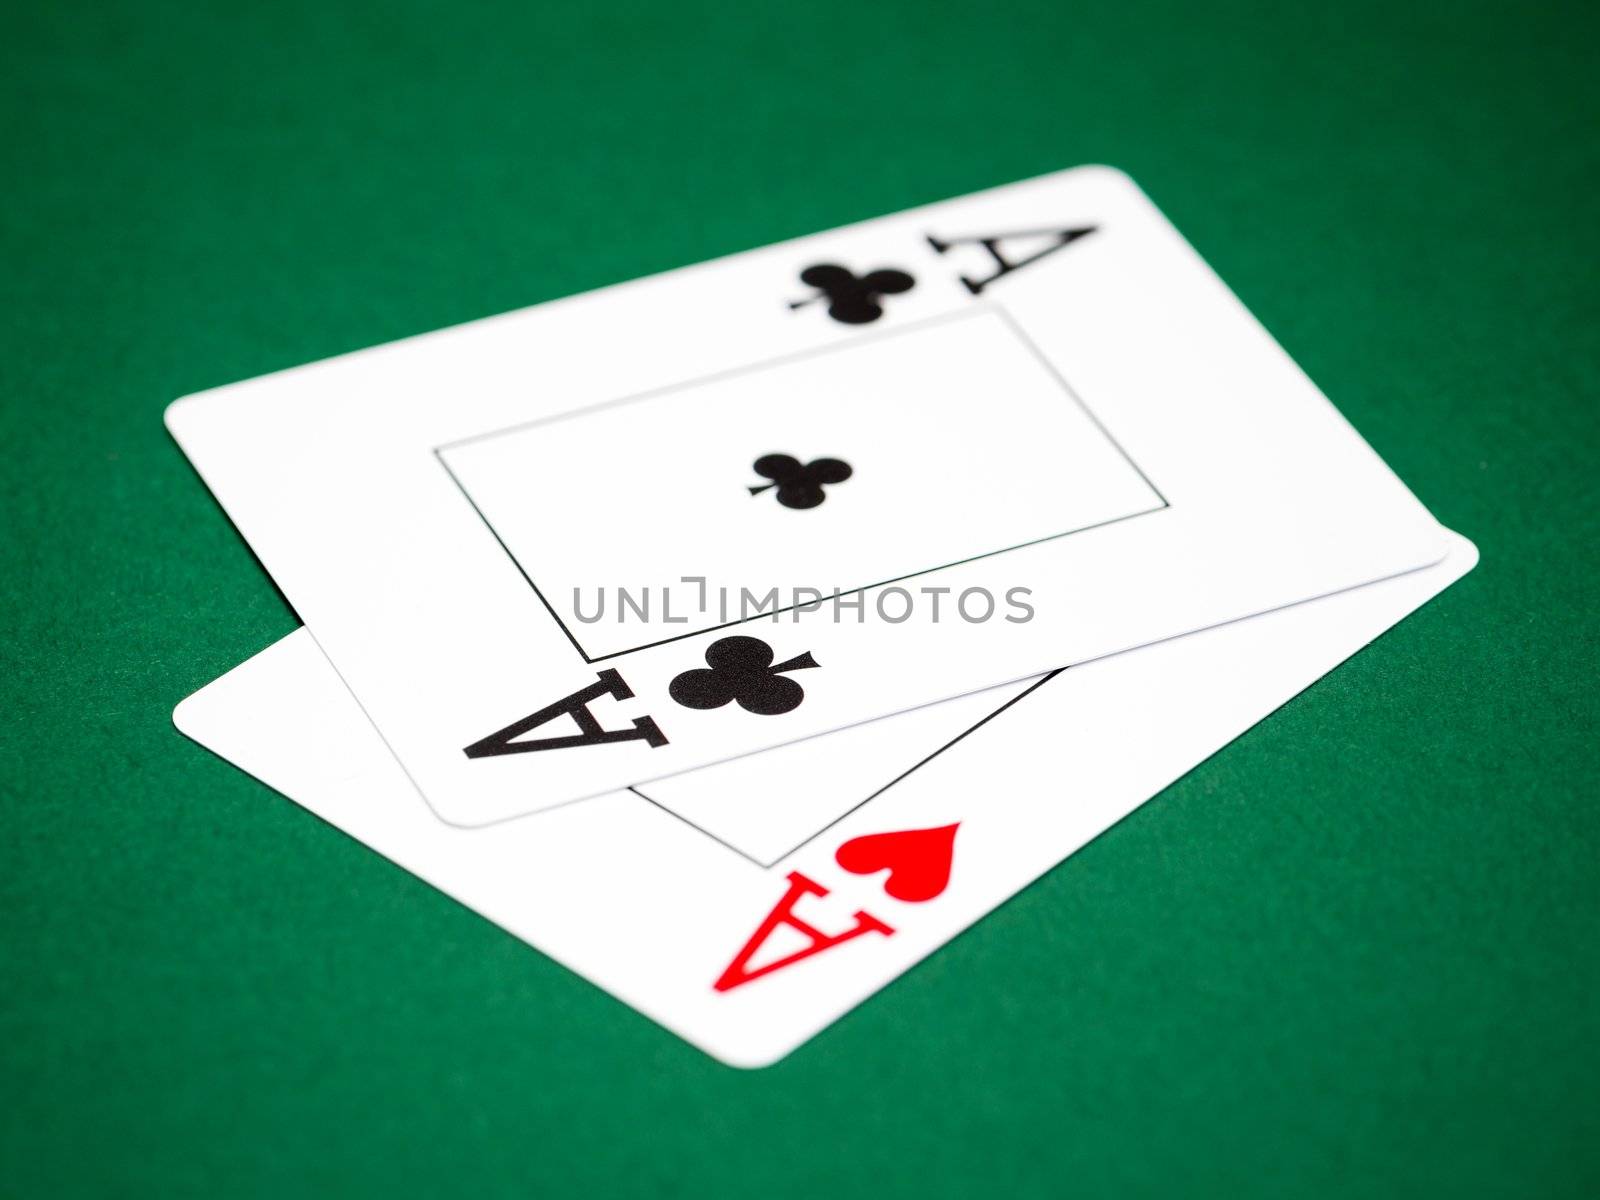 playing cards on a green table casino